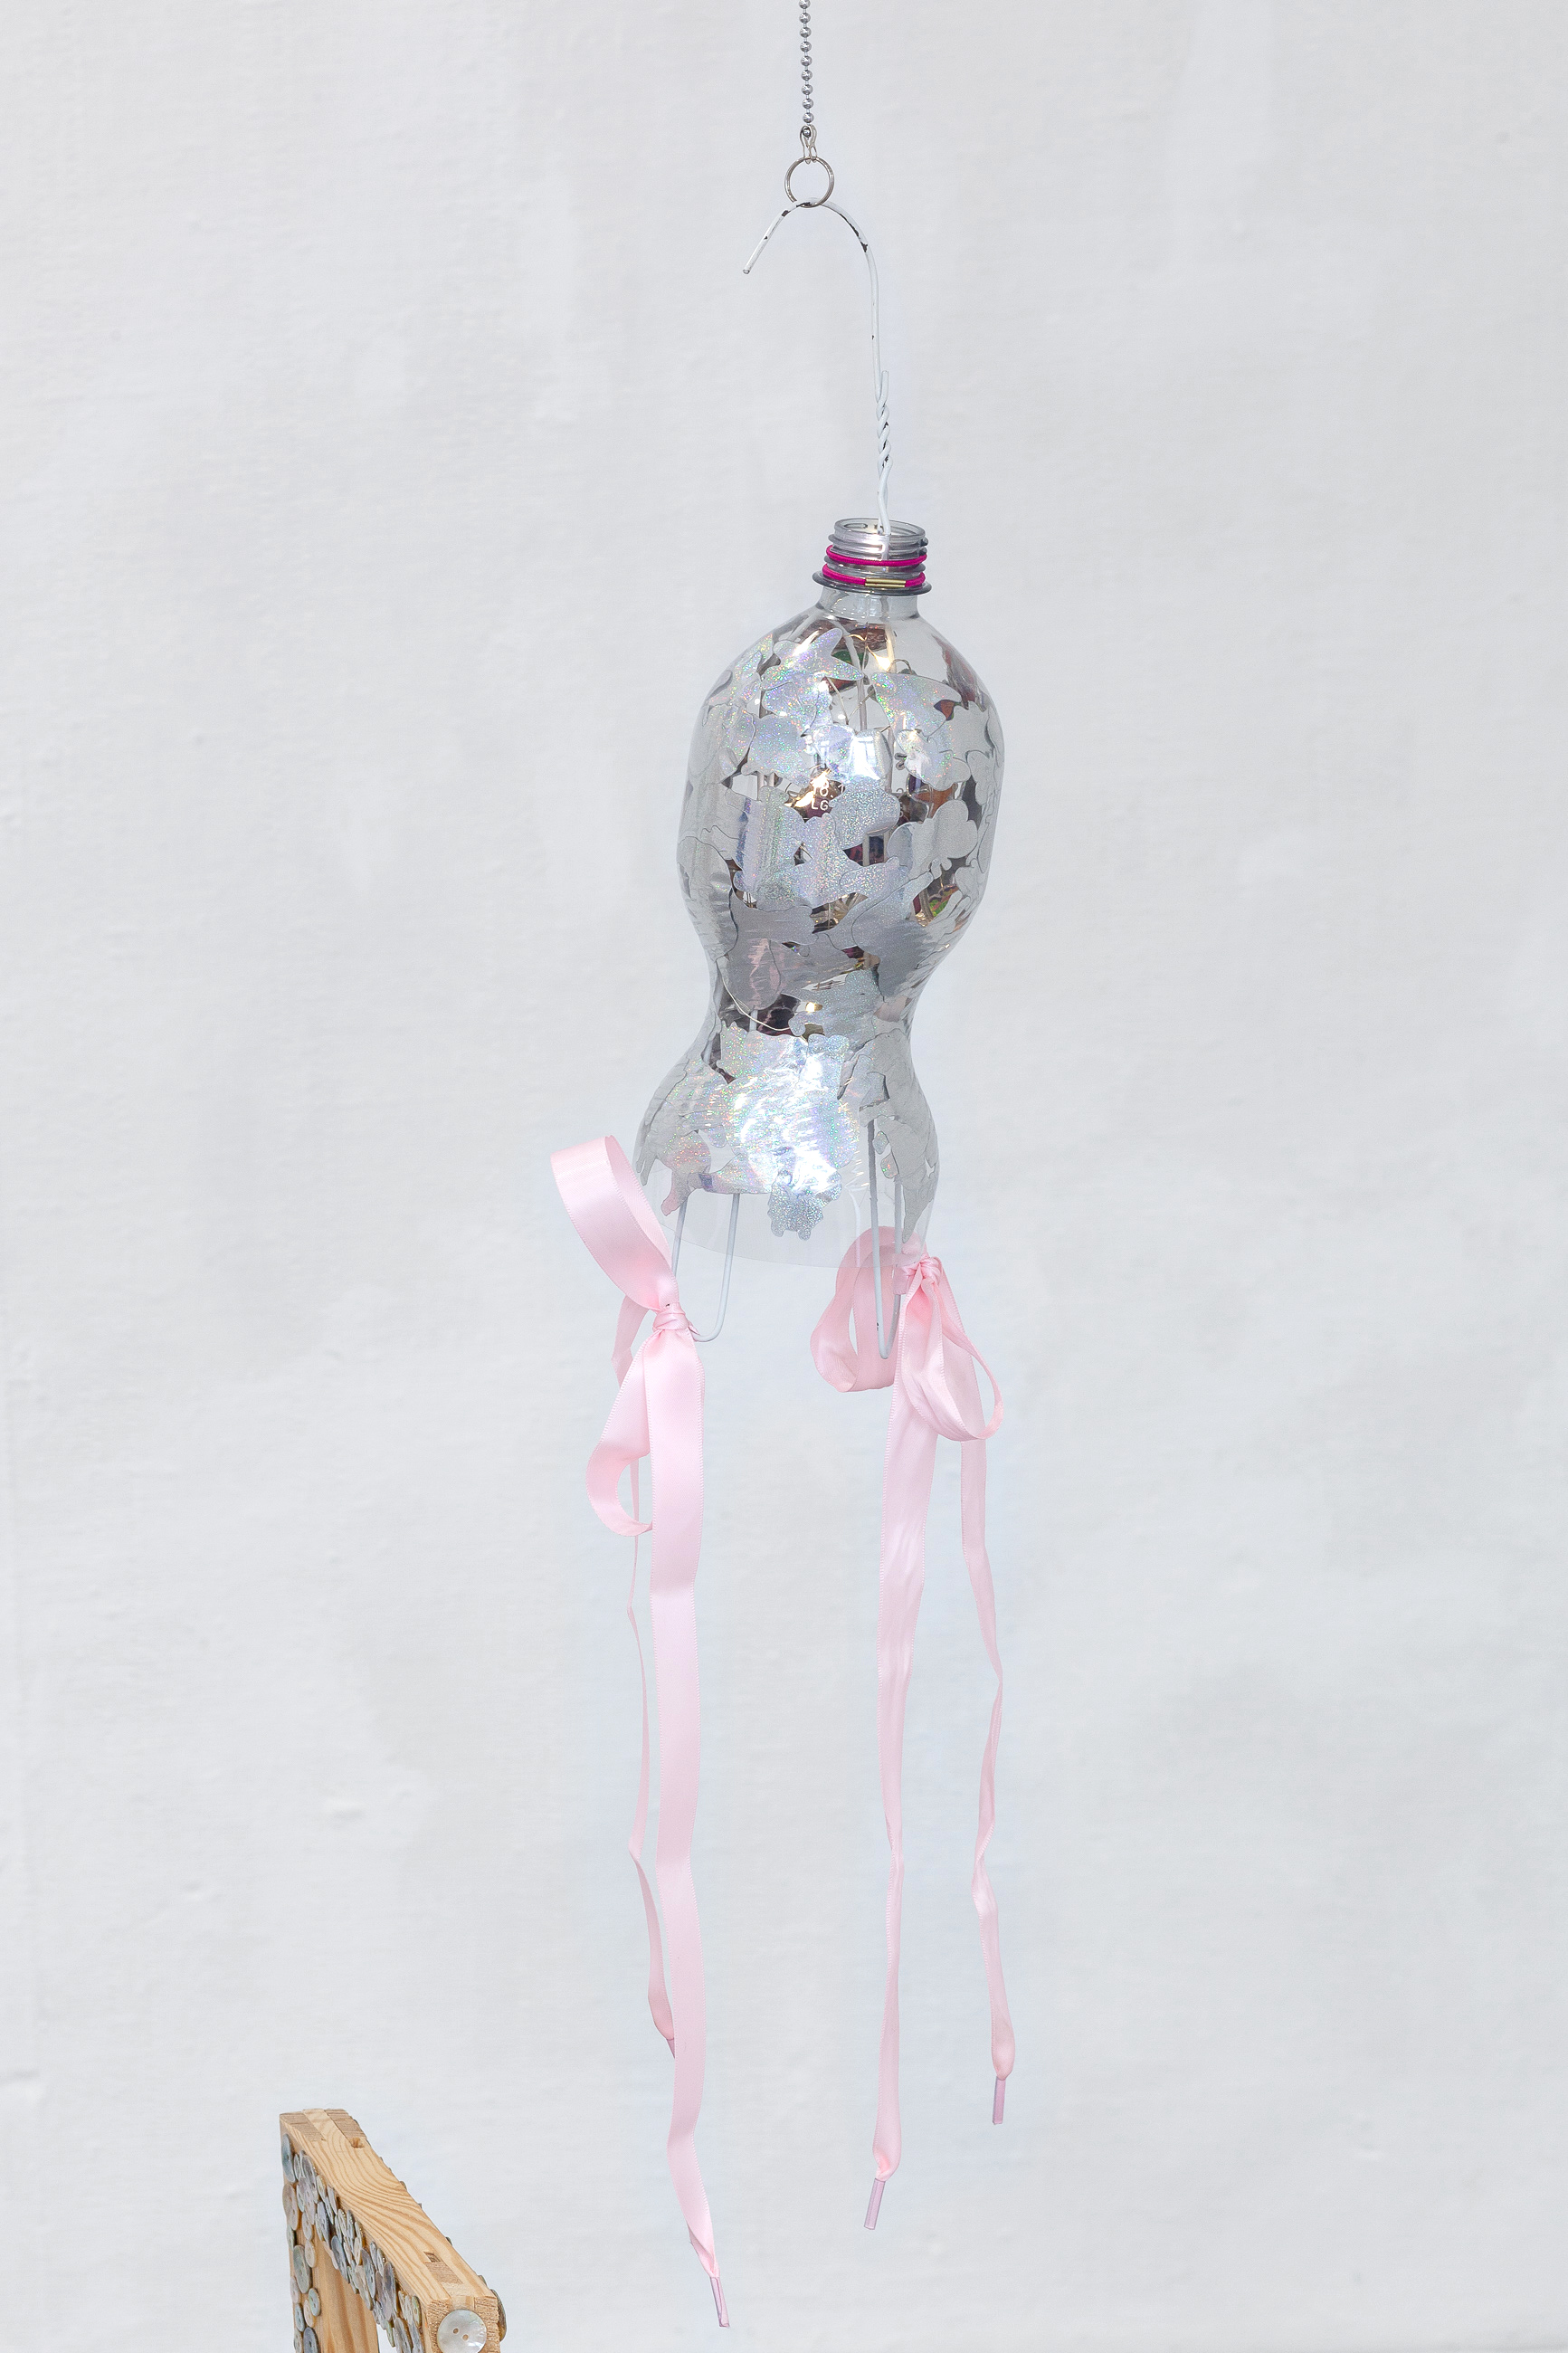 08. Paula Linke, Young women with fewer rights than their mothers and grandmothers, plastic bottle, sticker, led lights, hanger, shoelaces, 2022